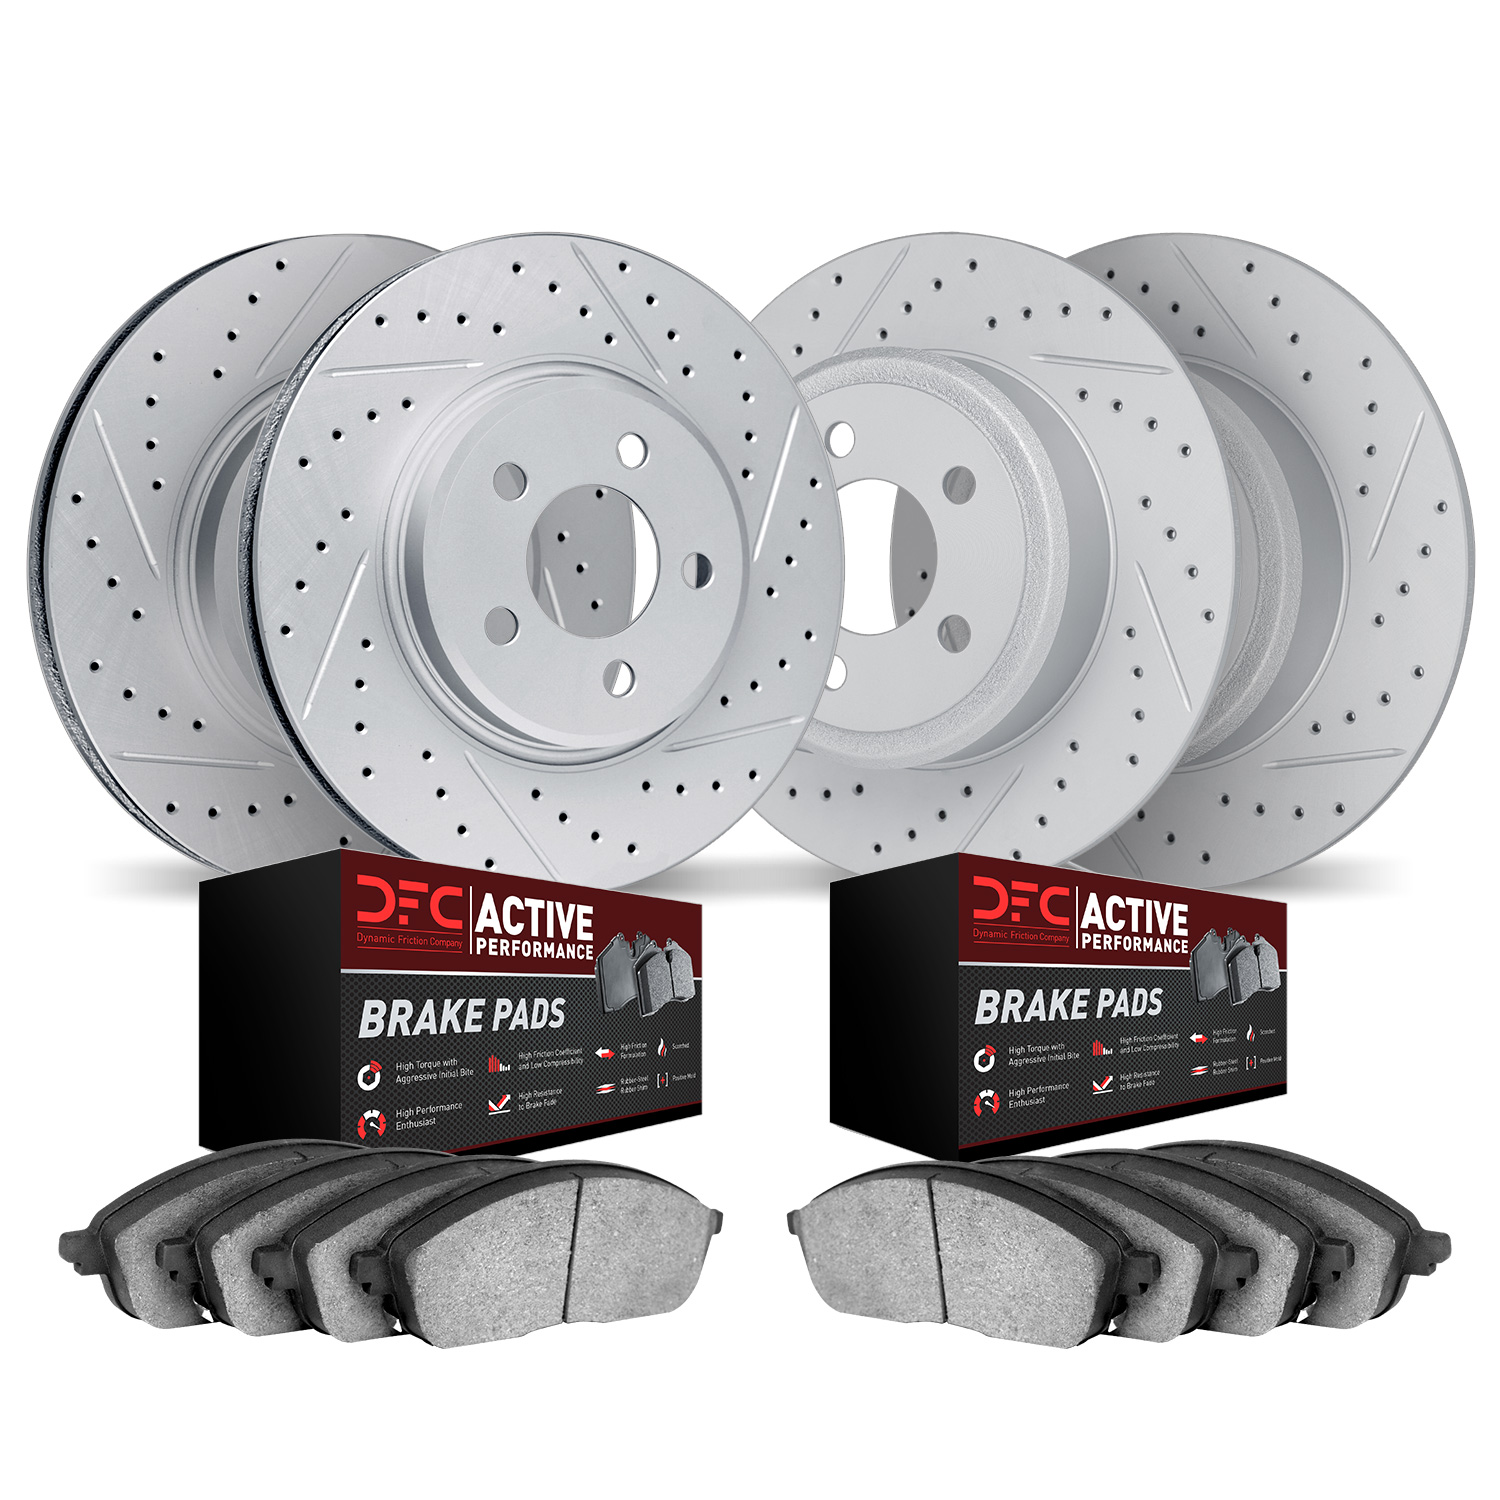 2704-72012 Geoperformance Drilled/Slotted Brake Rotors with Active Performance Pads Kit, 2004-2012 Mitsubishi, Position: Front a